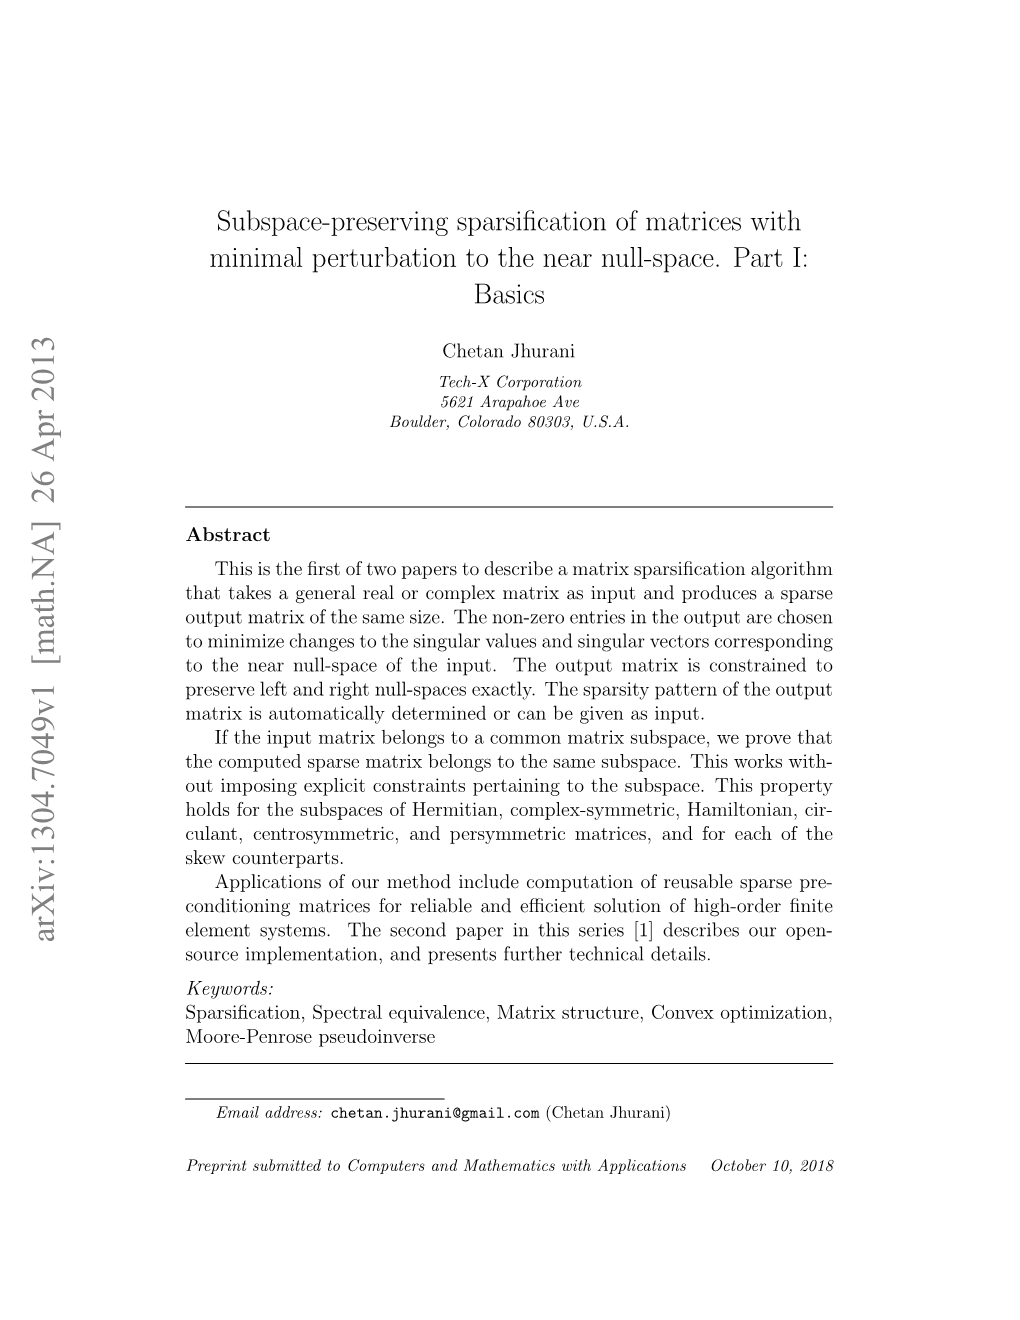 Subspace-Preserving Sparsification of Matrices with Minimal Perturbation